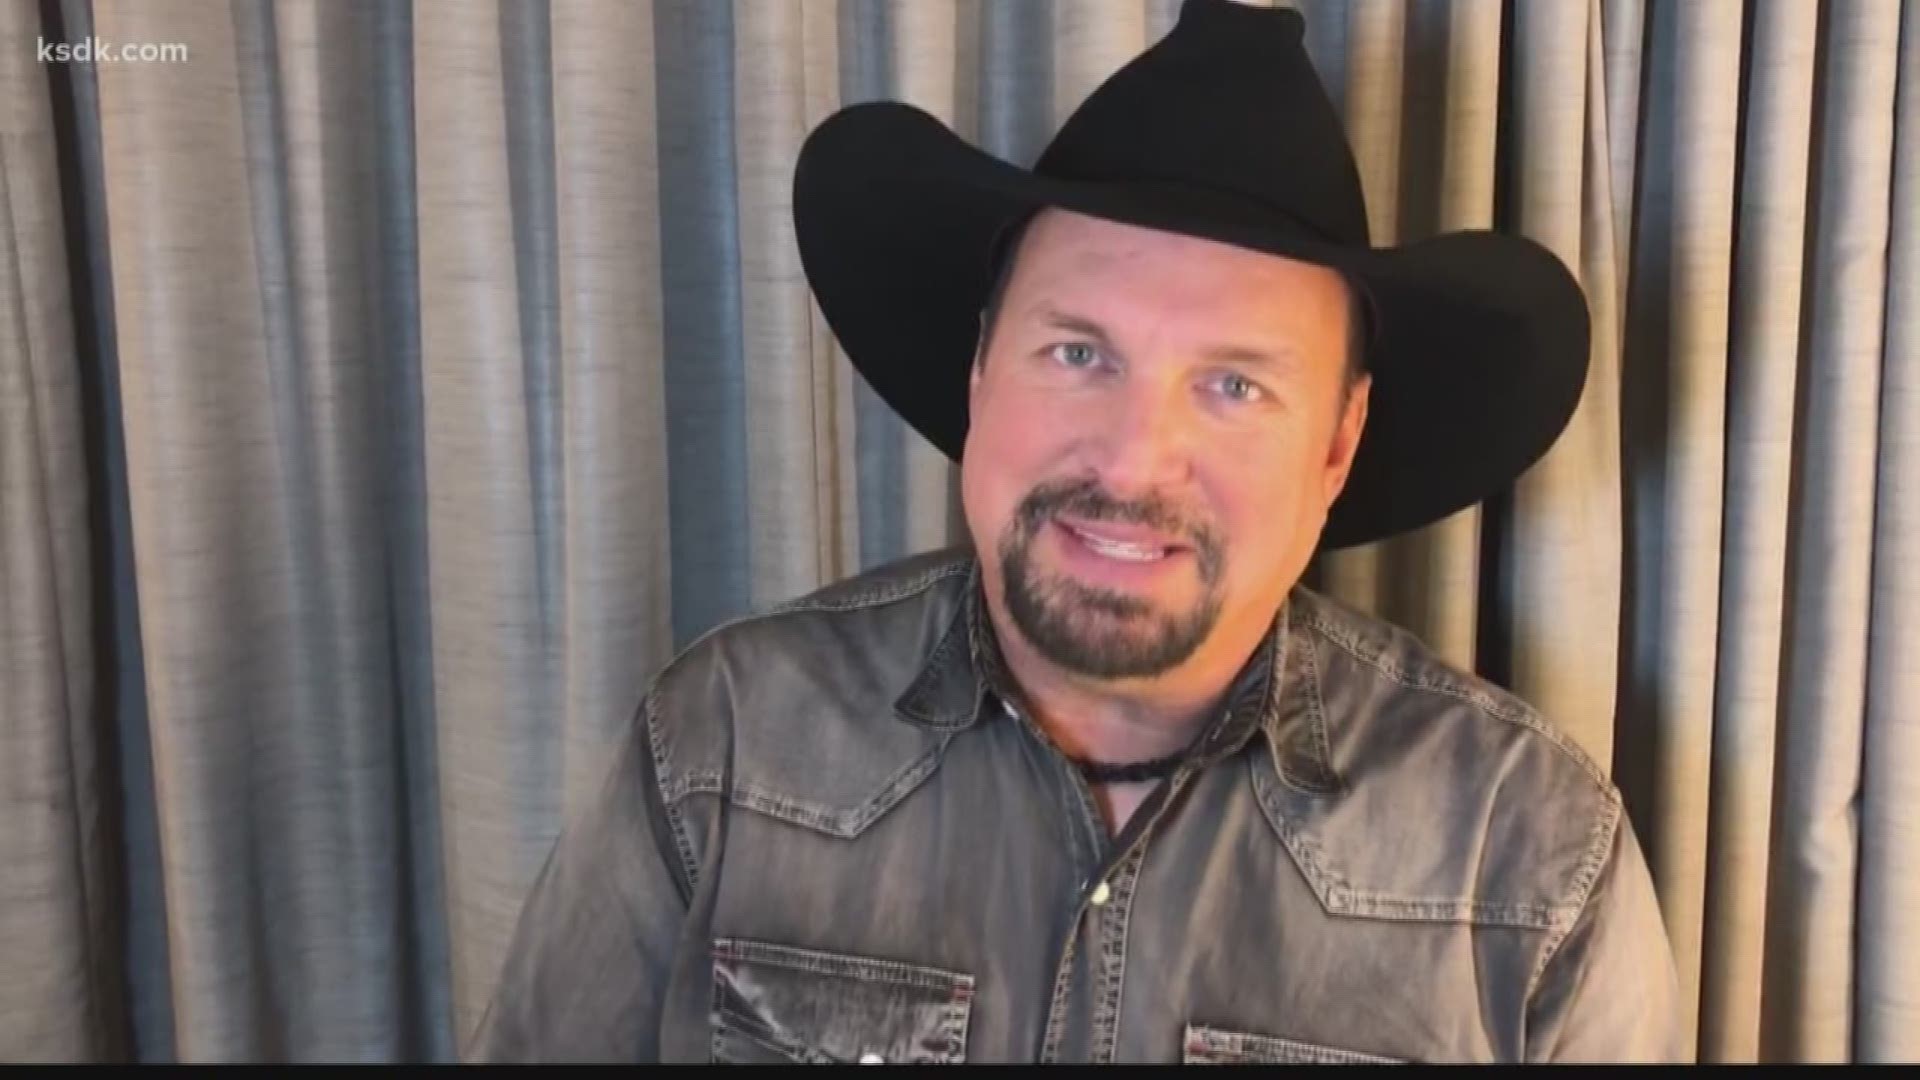 All it takes is a few minutes to change your life forever. A St. Charles family knows that well. Twice they've received calls that altered their lives, but this time they're getting the help of Garth Brooks.